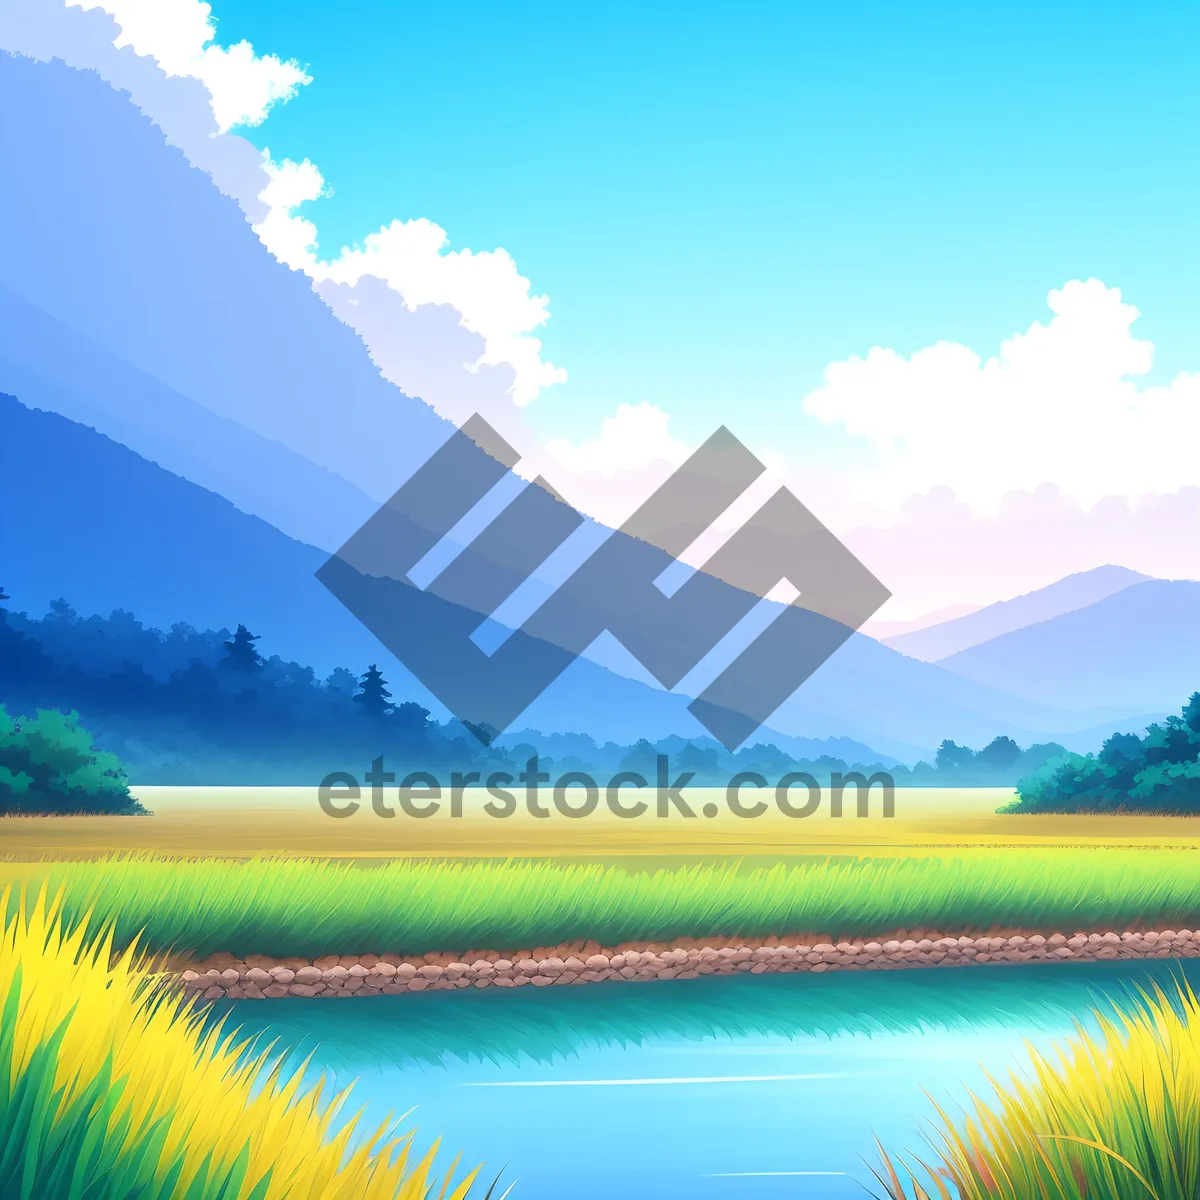 Picture of Idyllic Lakeside Sunset in Rural Countryside